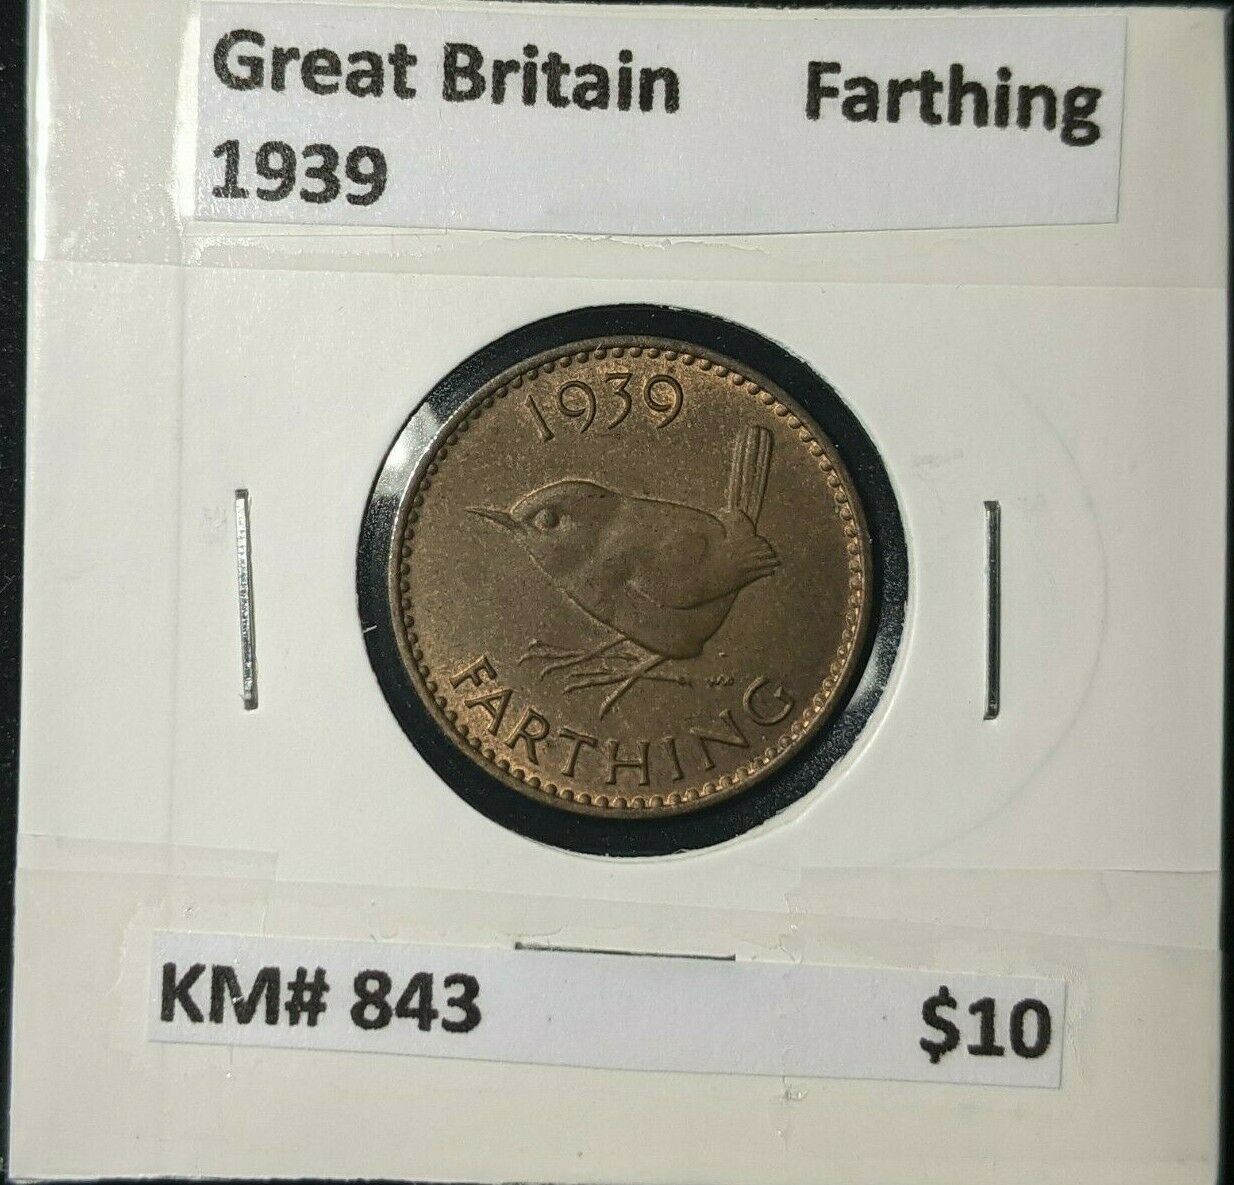 Great Britain 1939 1/4d Farthing KM# 843 #058